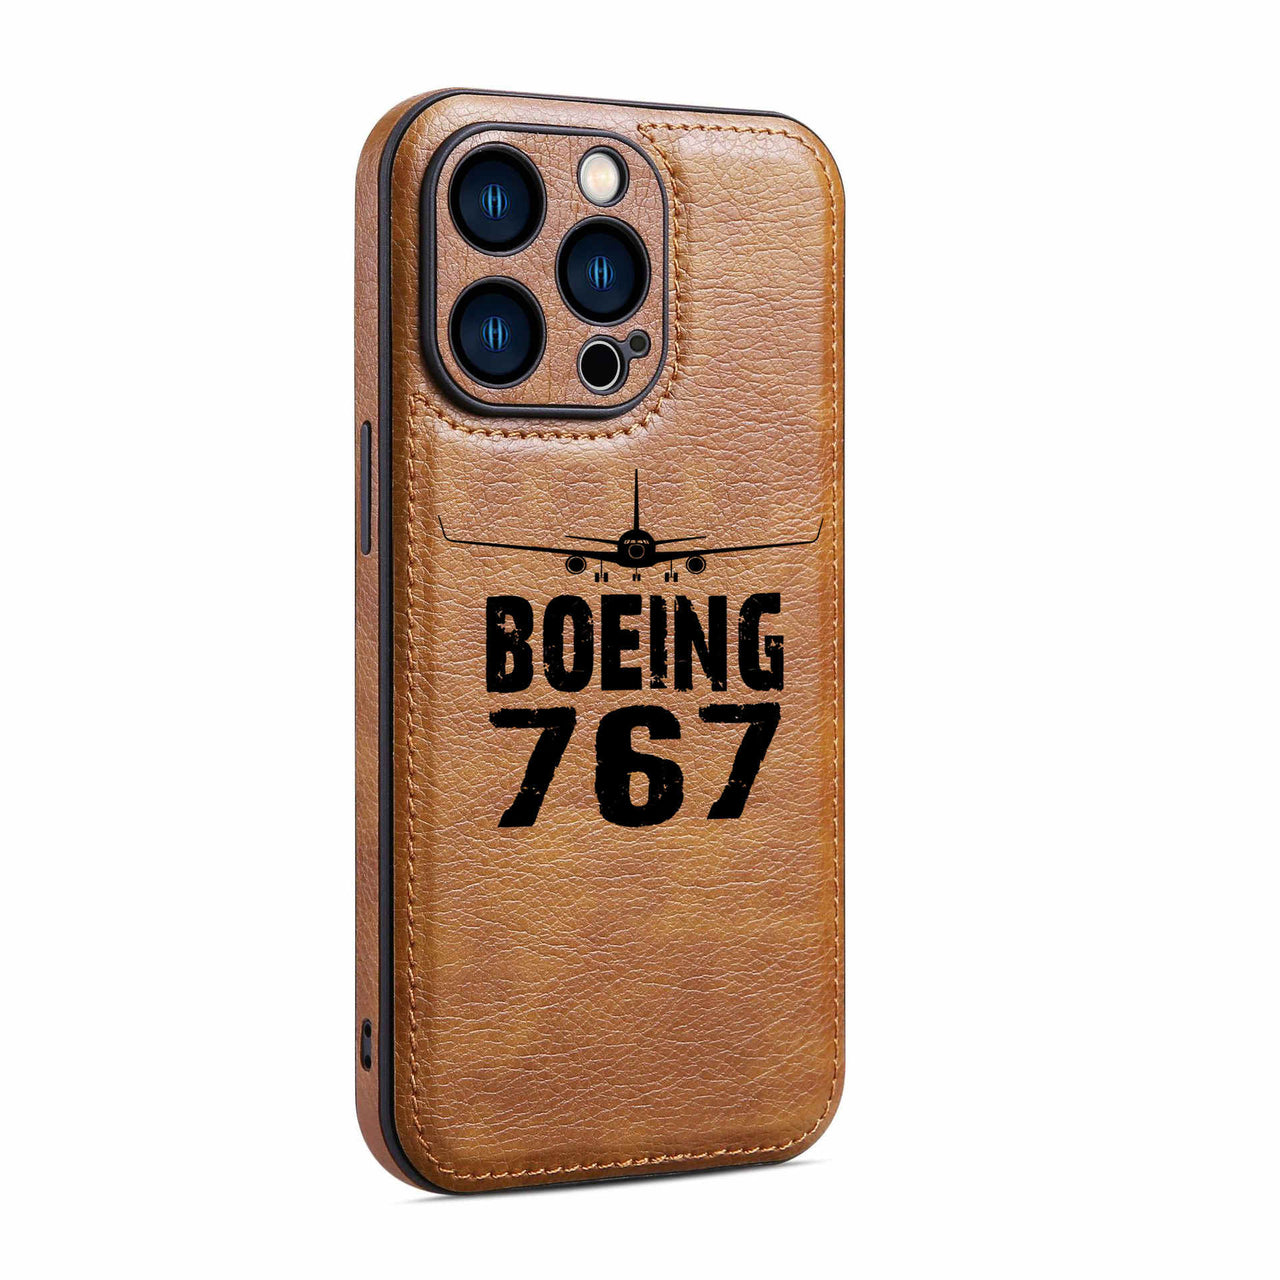 Boeing 767 & Plane Designed Leather iPhone Cases